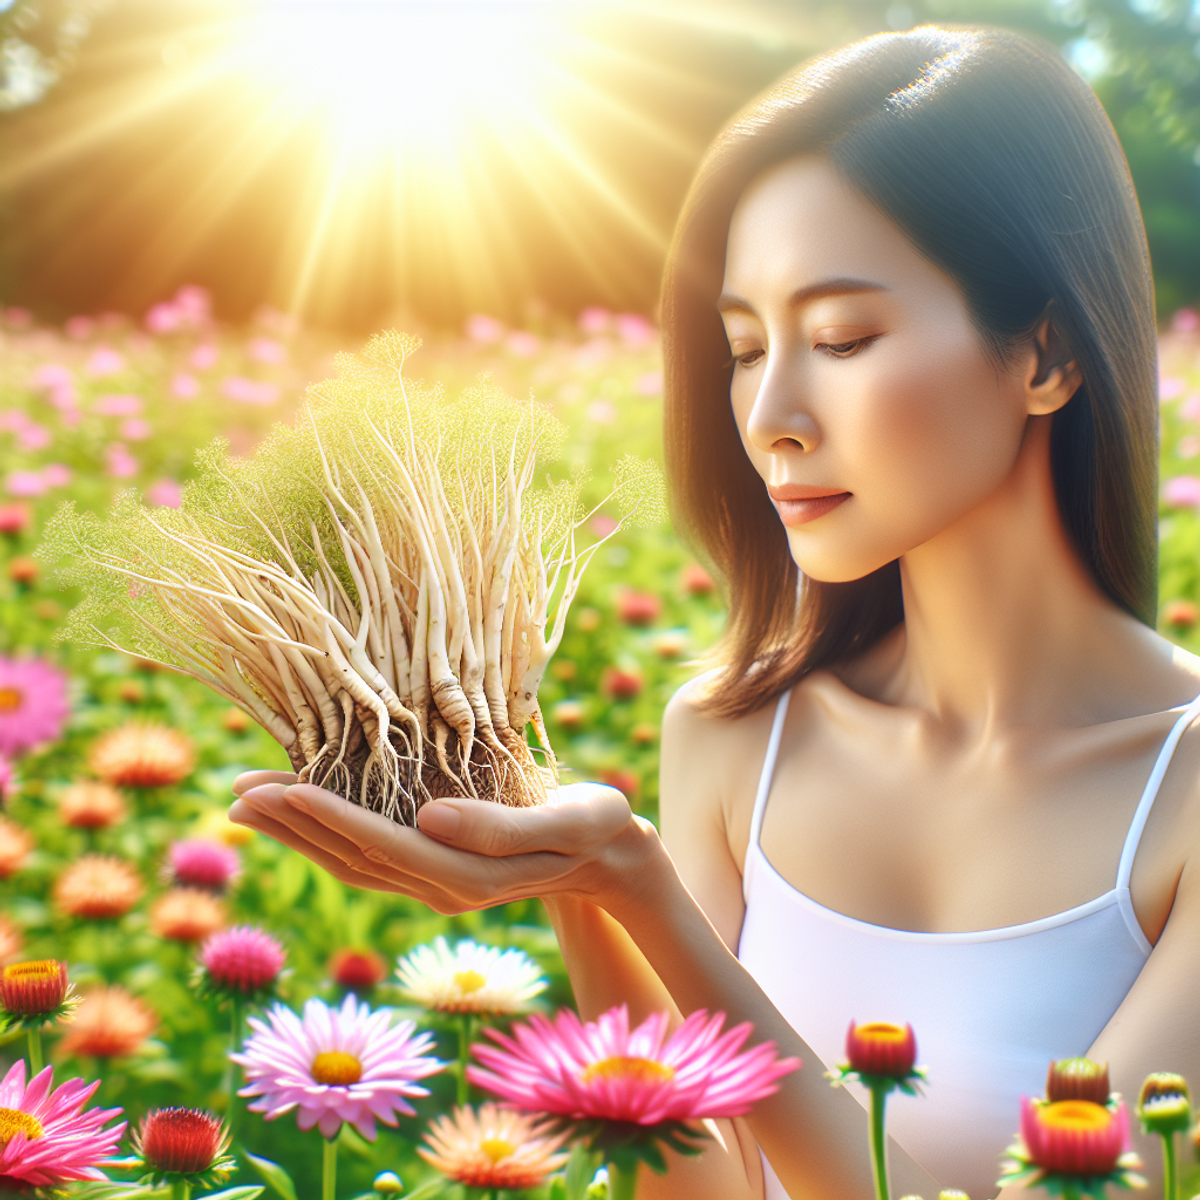 An Asian woman in her mid 30s stands in a field of blooming flowers, holding fresh Ashwagandha roots in one hand and open in a receiving gesture with the other.